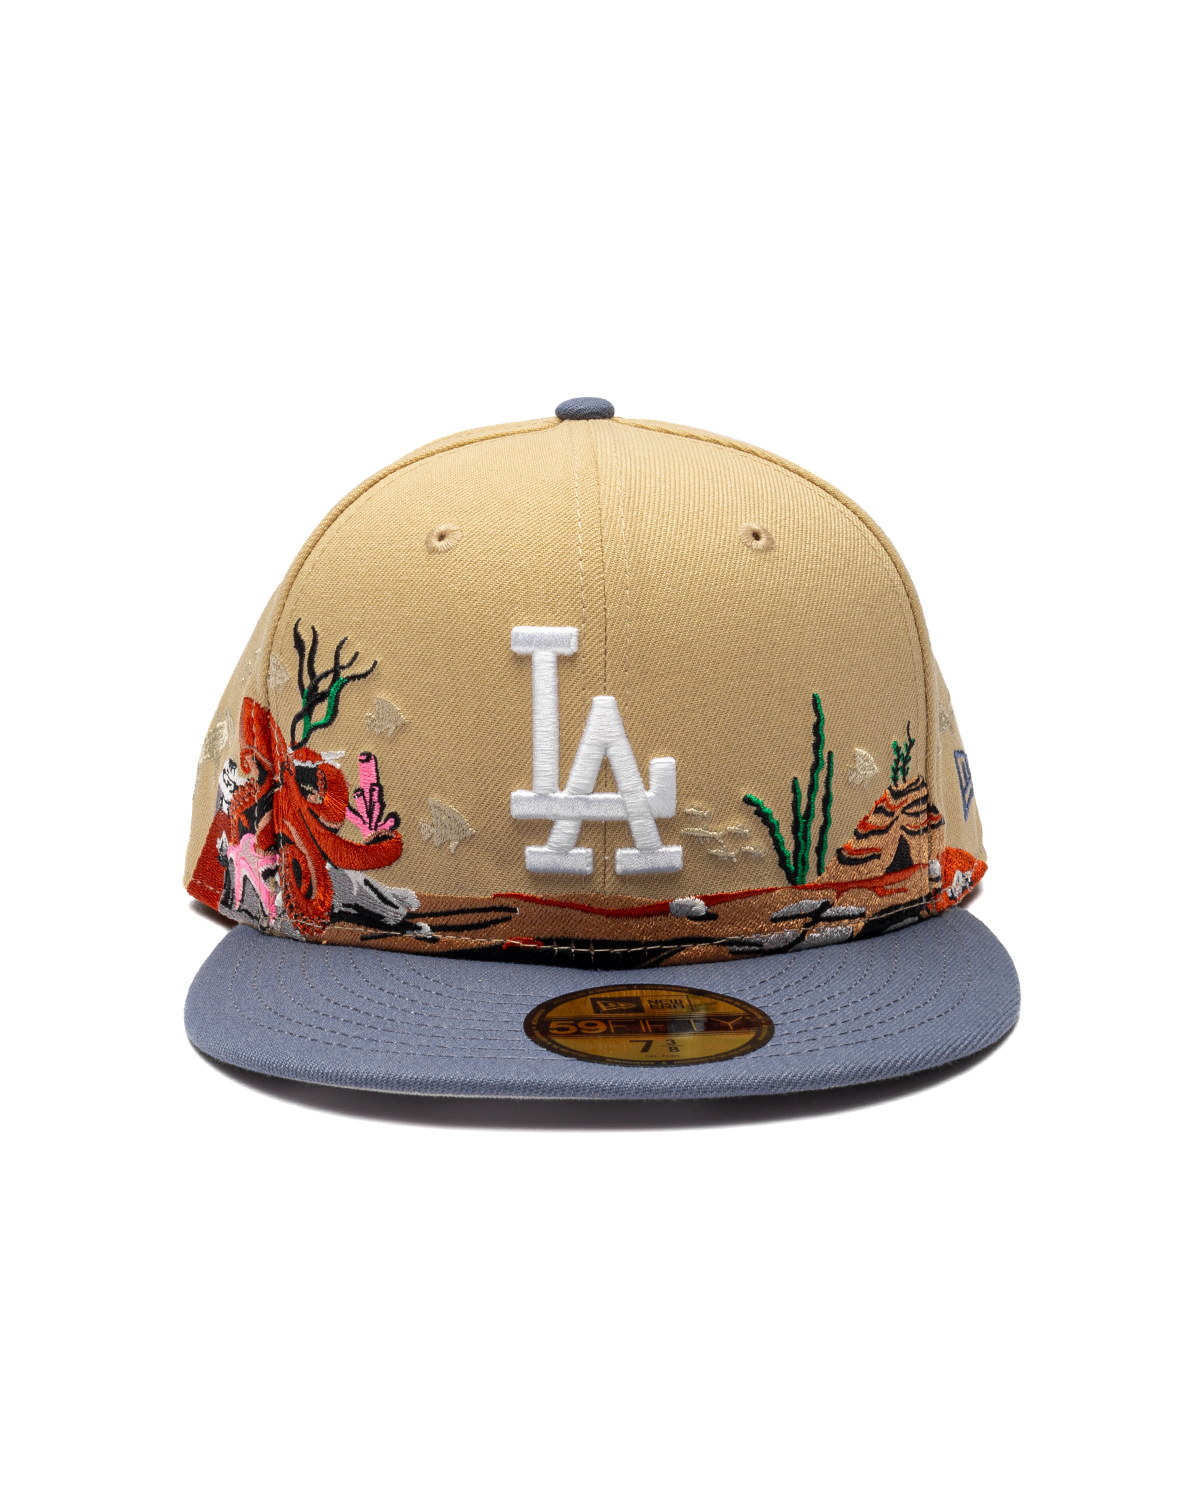 Los Angeles Dodgers Team Landscape Fitted Hat